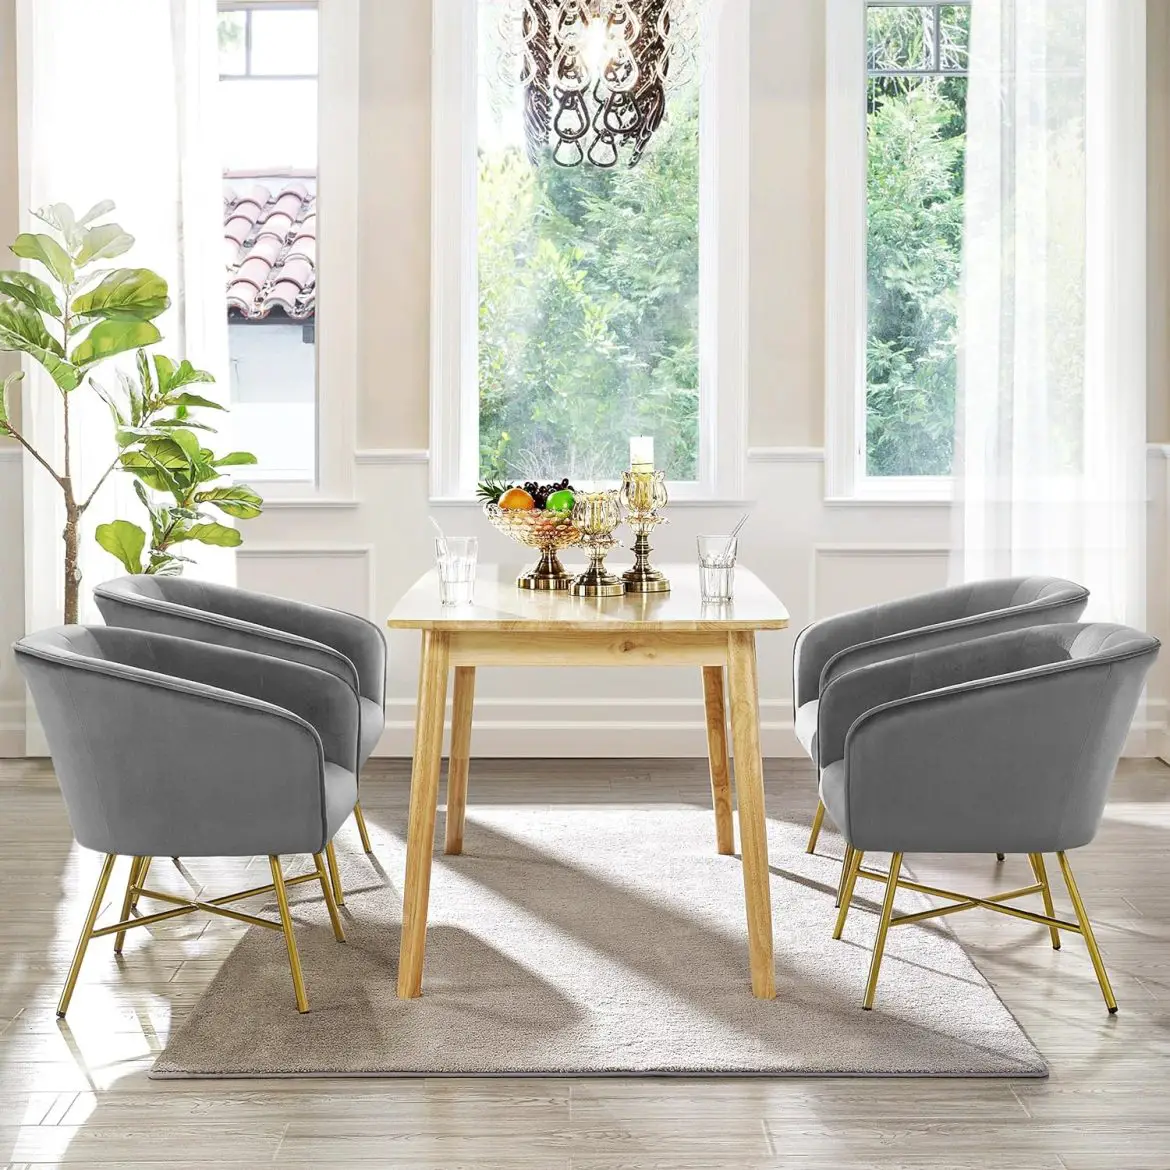 Plush and Practical: Top 10 Velvet Dining Chairs with Arms on Amazon